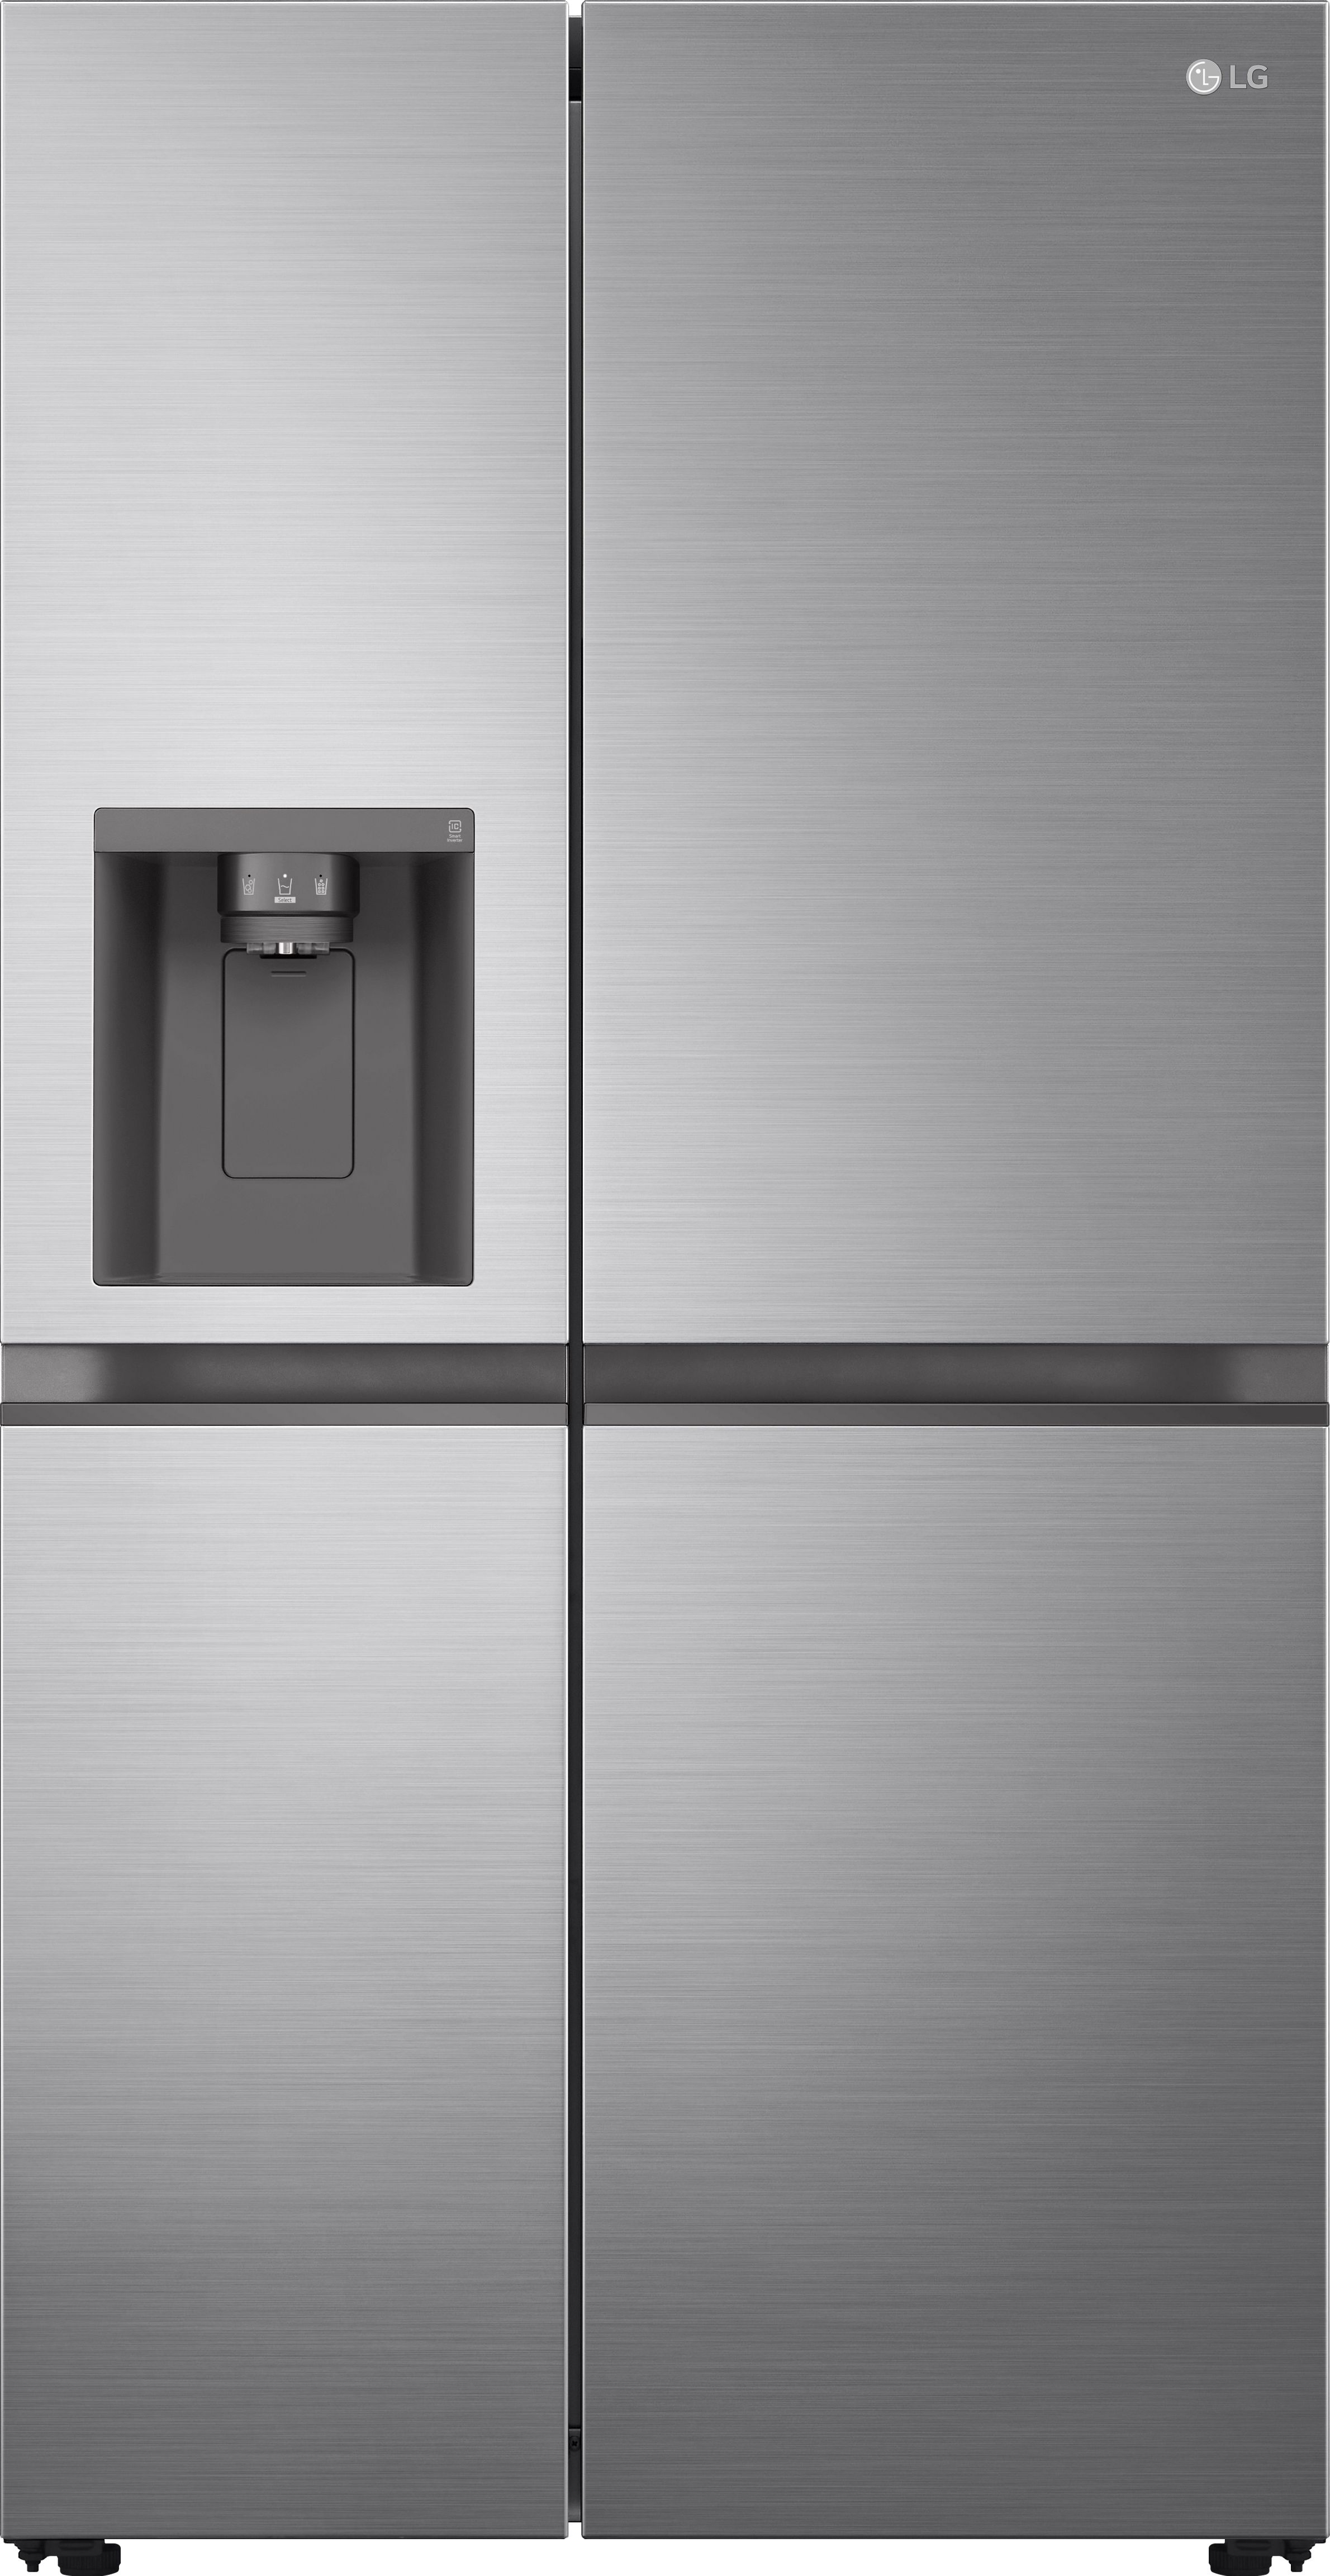 LG NatureFRESH GSLV50PZXL Plumbed Frost Free American Fridge Freezer - Shiny Steel - E Rated, Silver